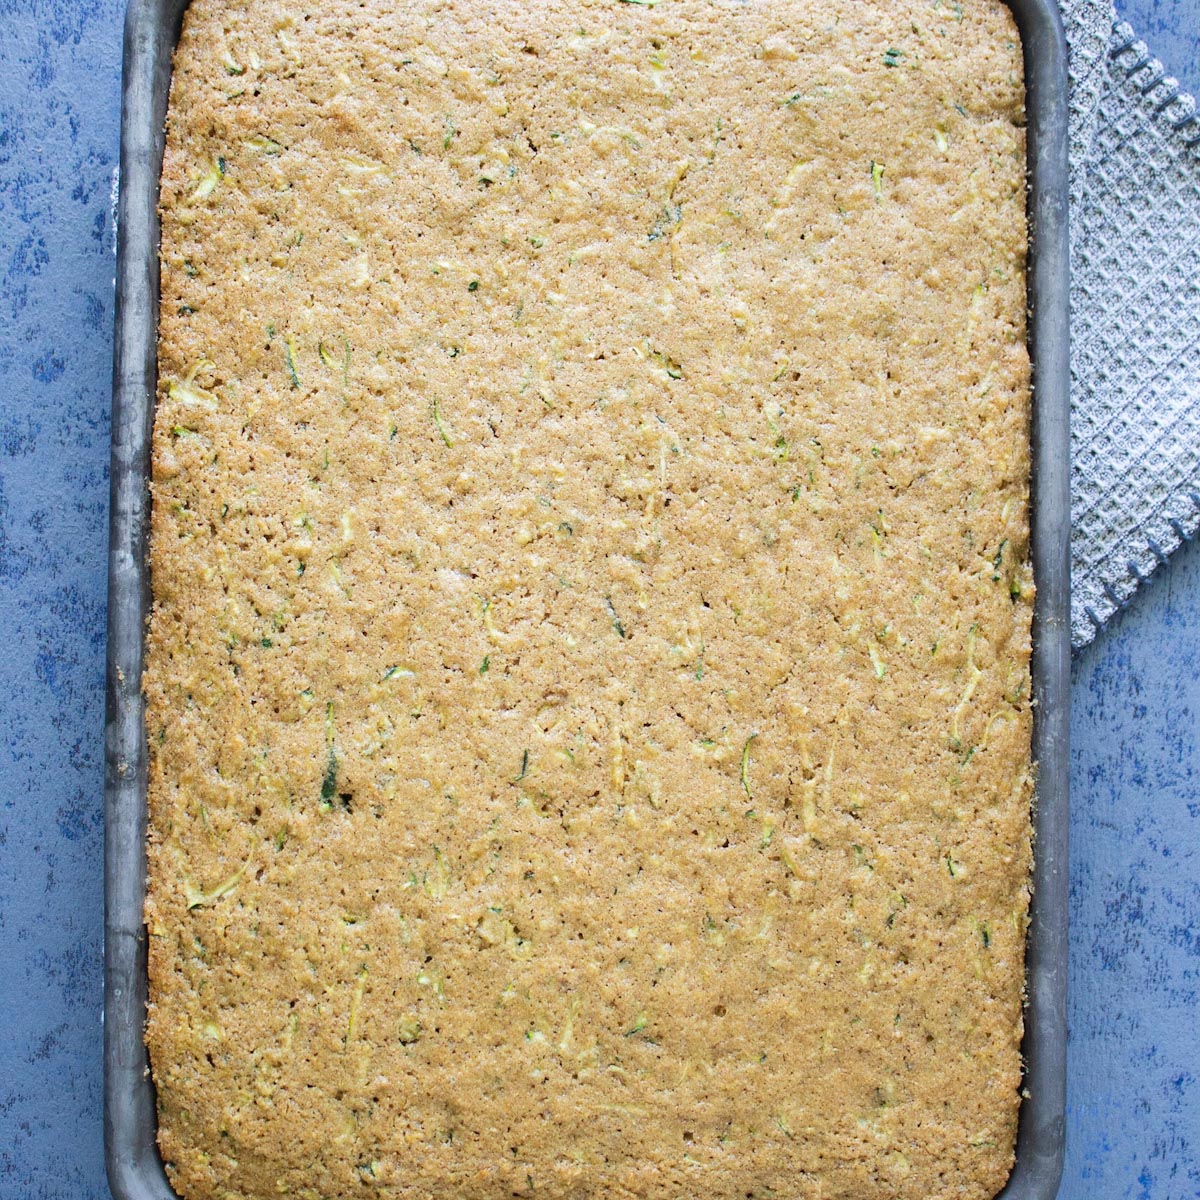 Top view of a baked zucchini sheet cake